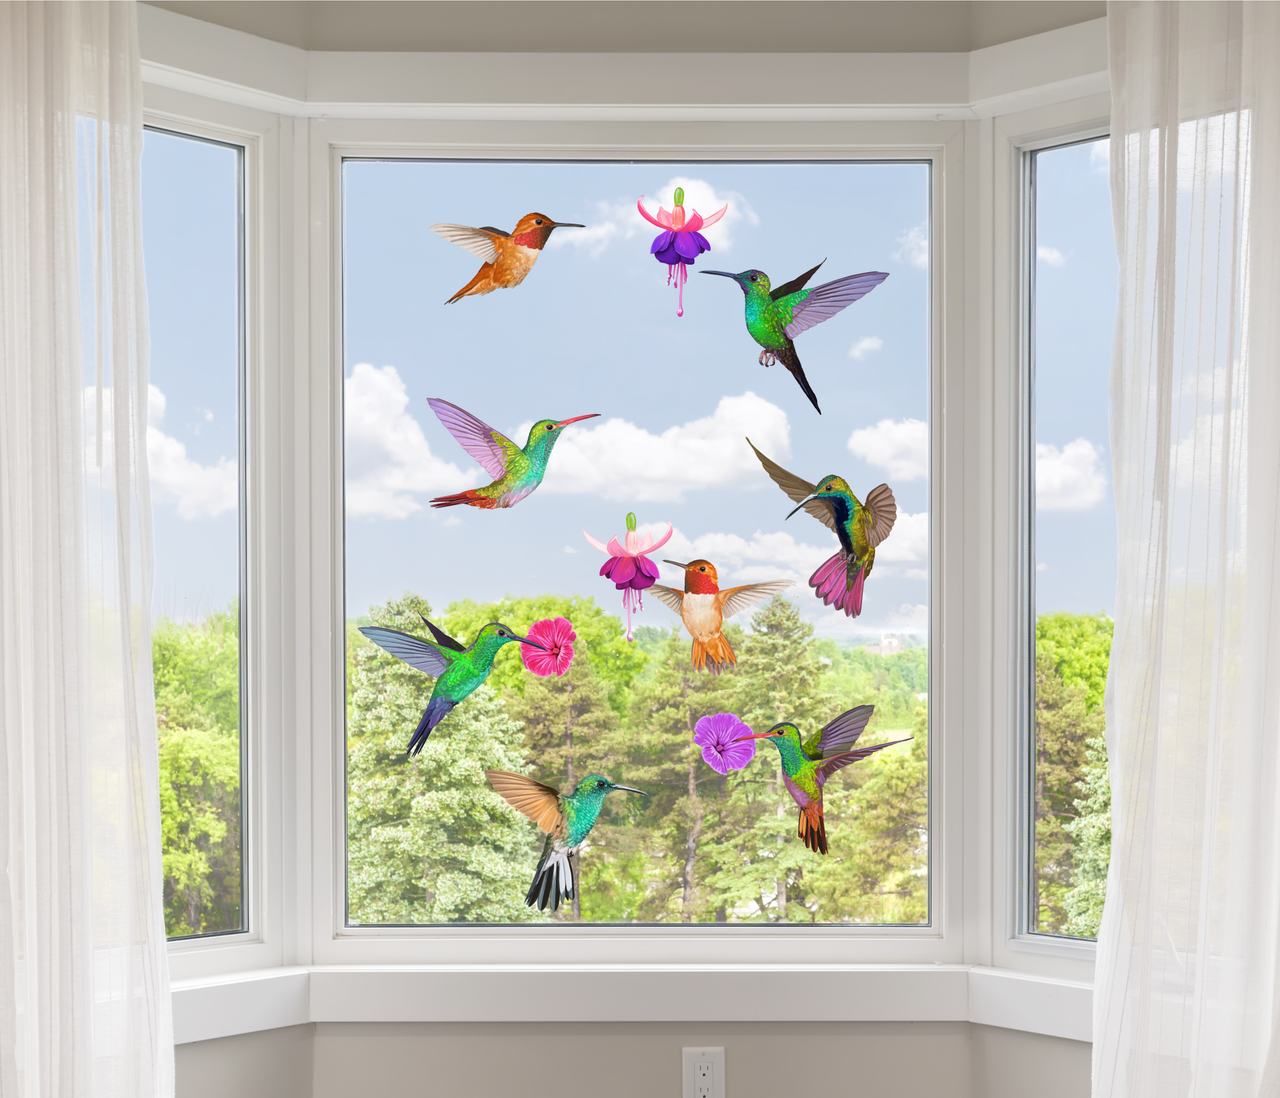 12 Hummingbird Window Clings Non Adhesive Vinyl Stickers Beautiful Glass  Safety Sticker the Decals can Deter Birds from Window Collision Strike